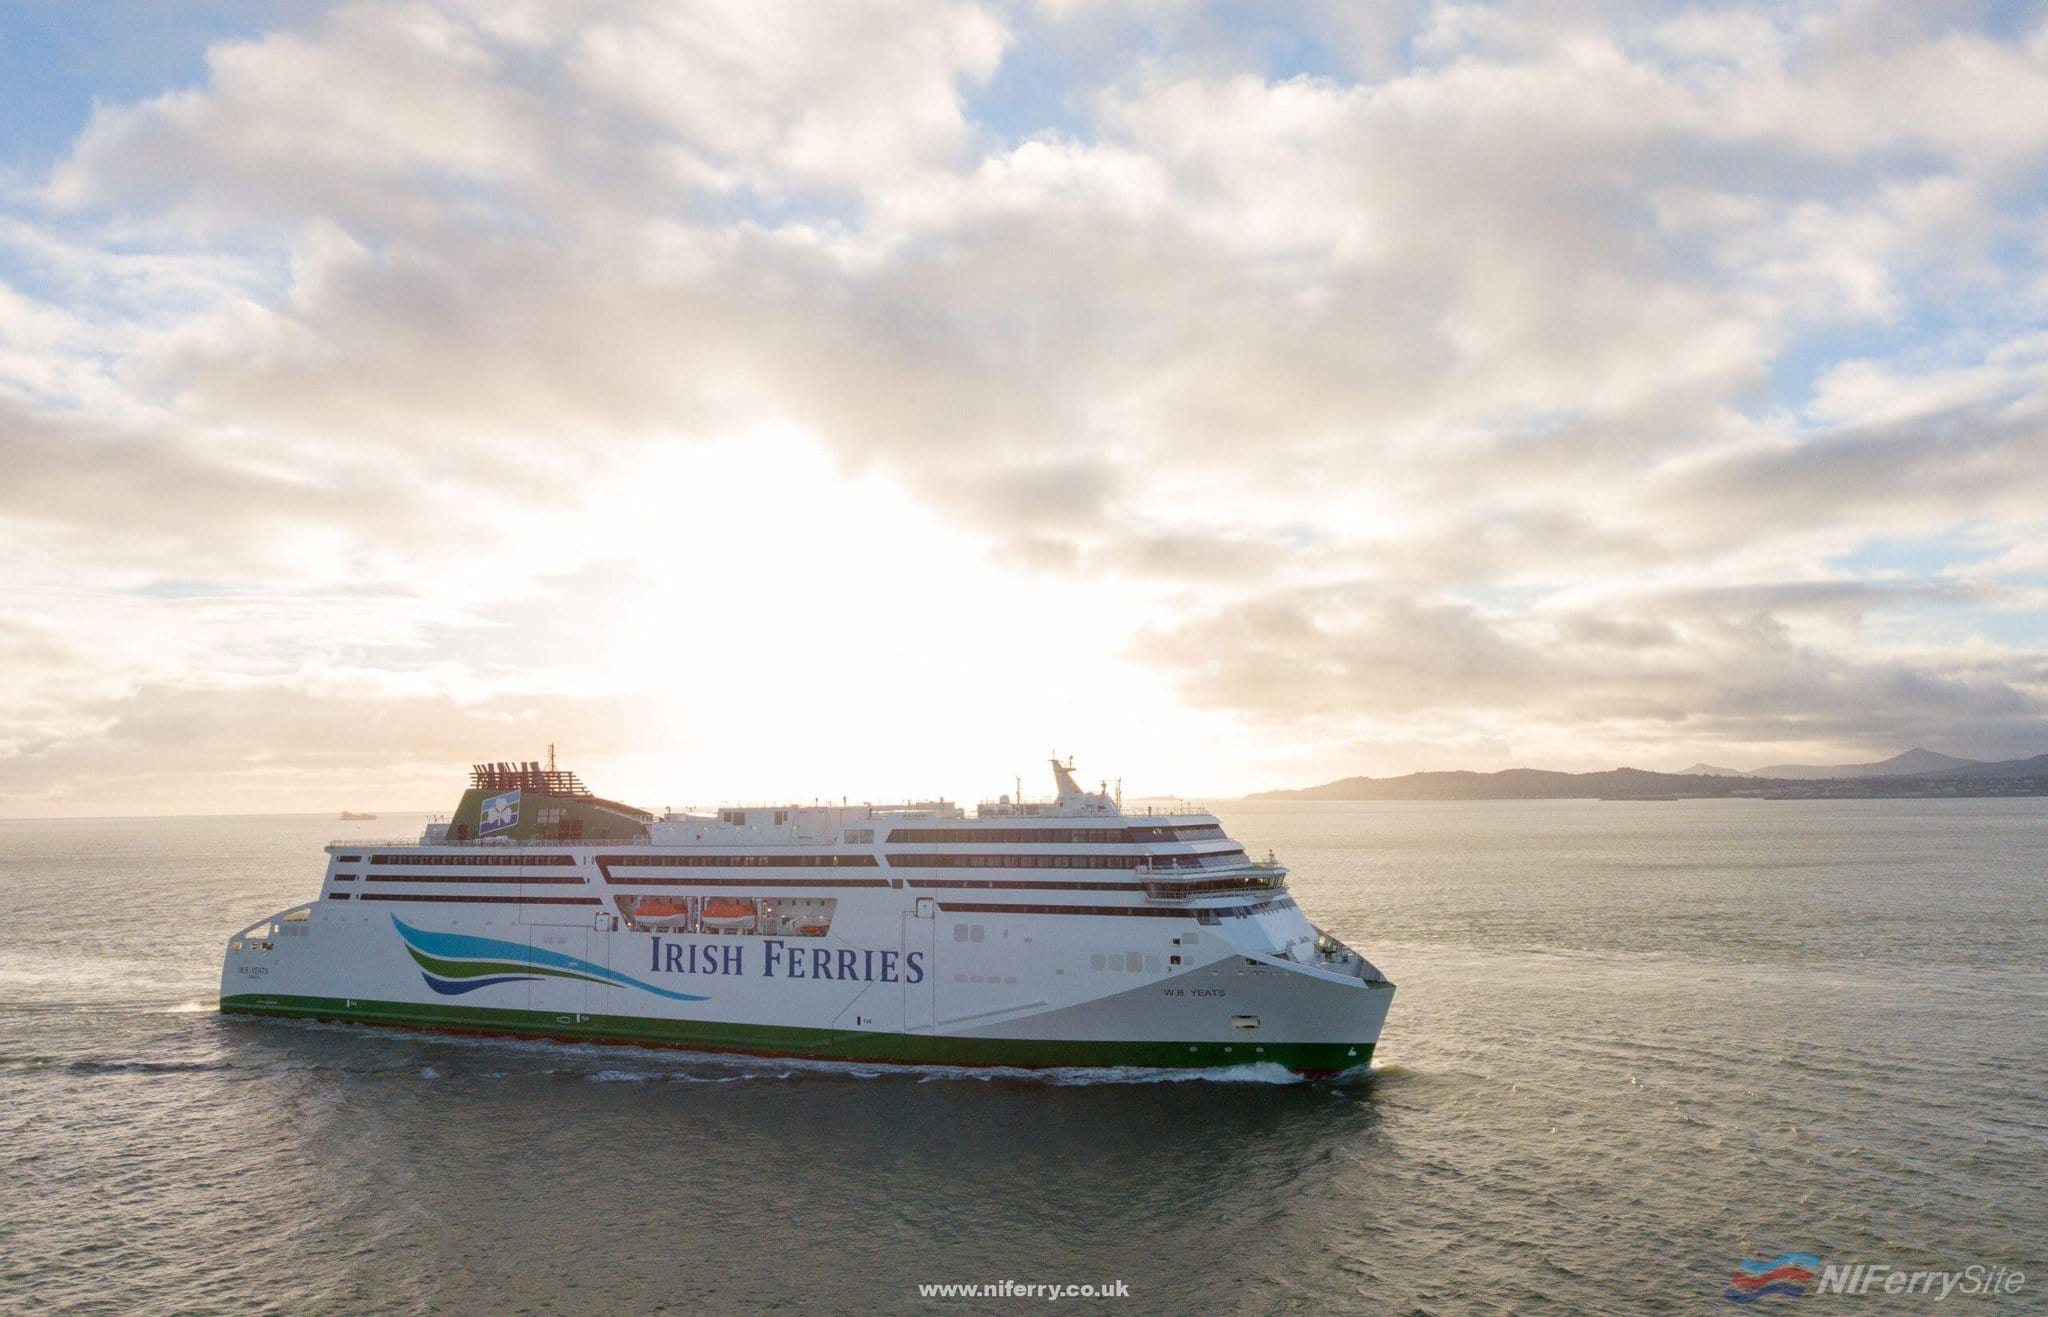 Irish Ferries W.B. YEATS approaches Dublin Port for the first time, Thursday 20th December 2018. Copyright © Irish Ferries.